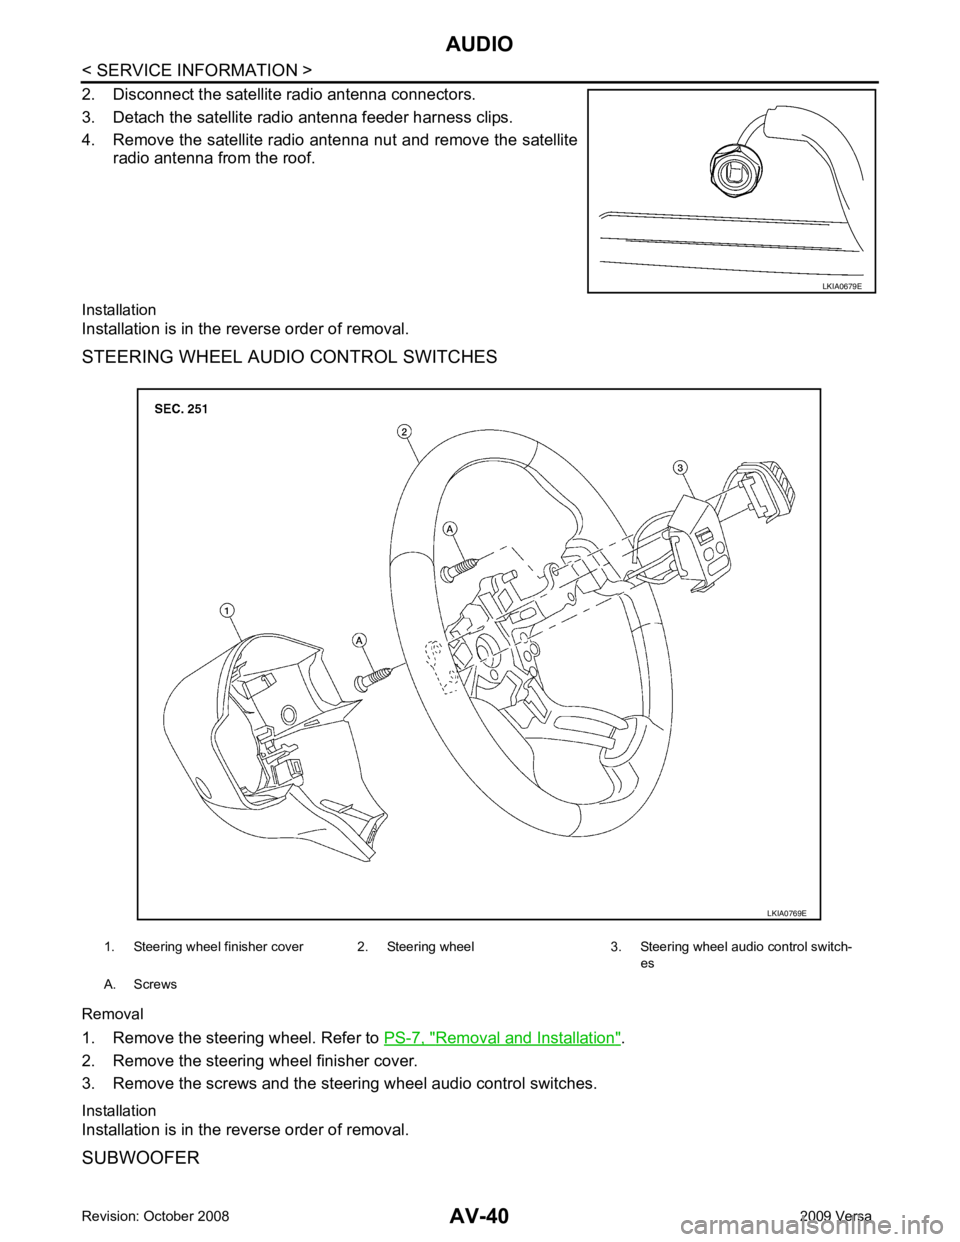 NISSAN LATIO 2009  Service Repair Manual Removal and Installation " .
2. Remove the steering wheel finisher cover.
3. Remove the screws and the steering wheel audio control switches.
Installation
Installation is in the reverse order of remov